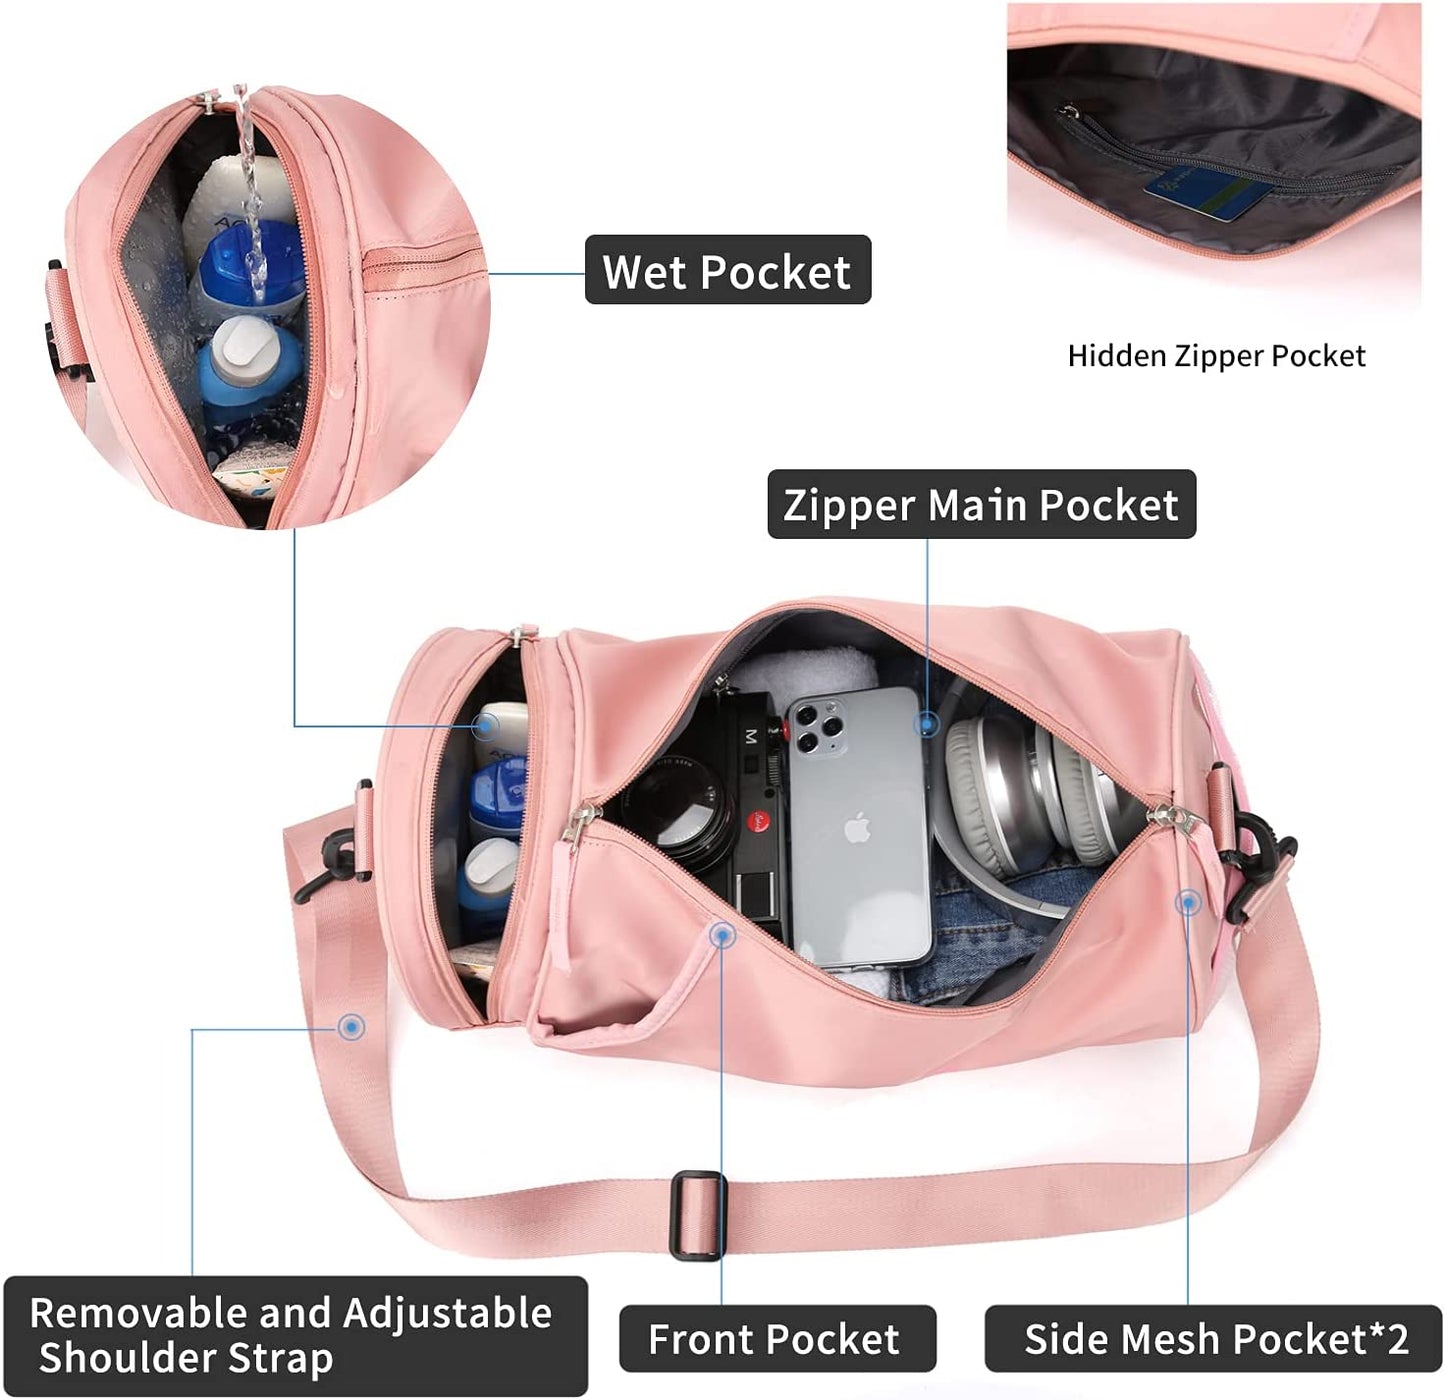 Small Sports Gym Bag for Women with Wet Pocket Waterproof, Workout Bags for Gym Women,Exercise Beach Yoga Dance Bag,Pink